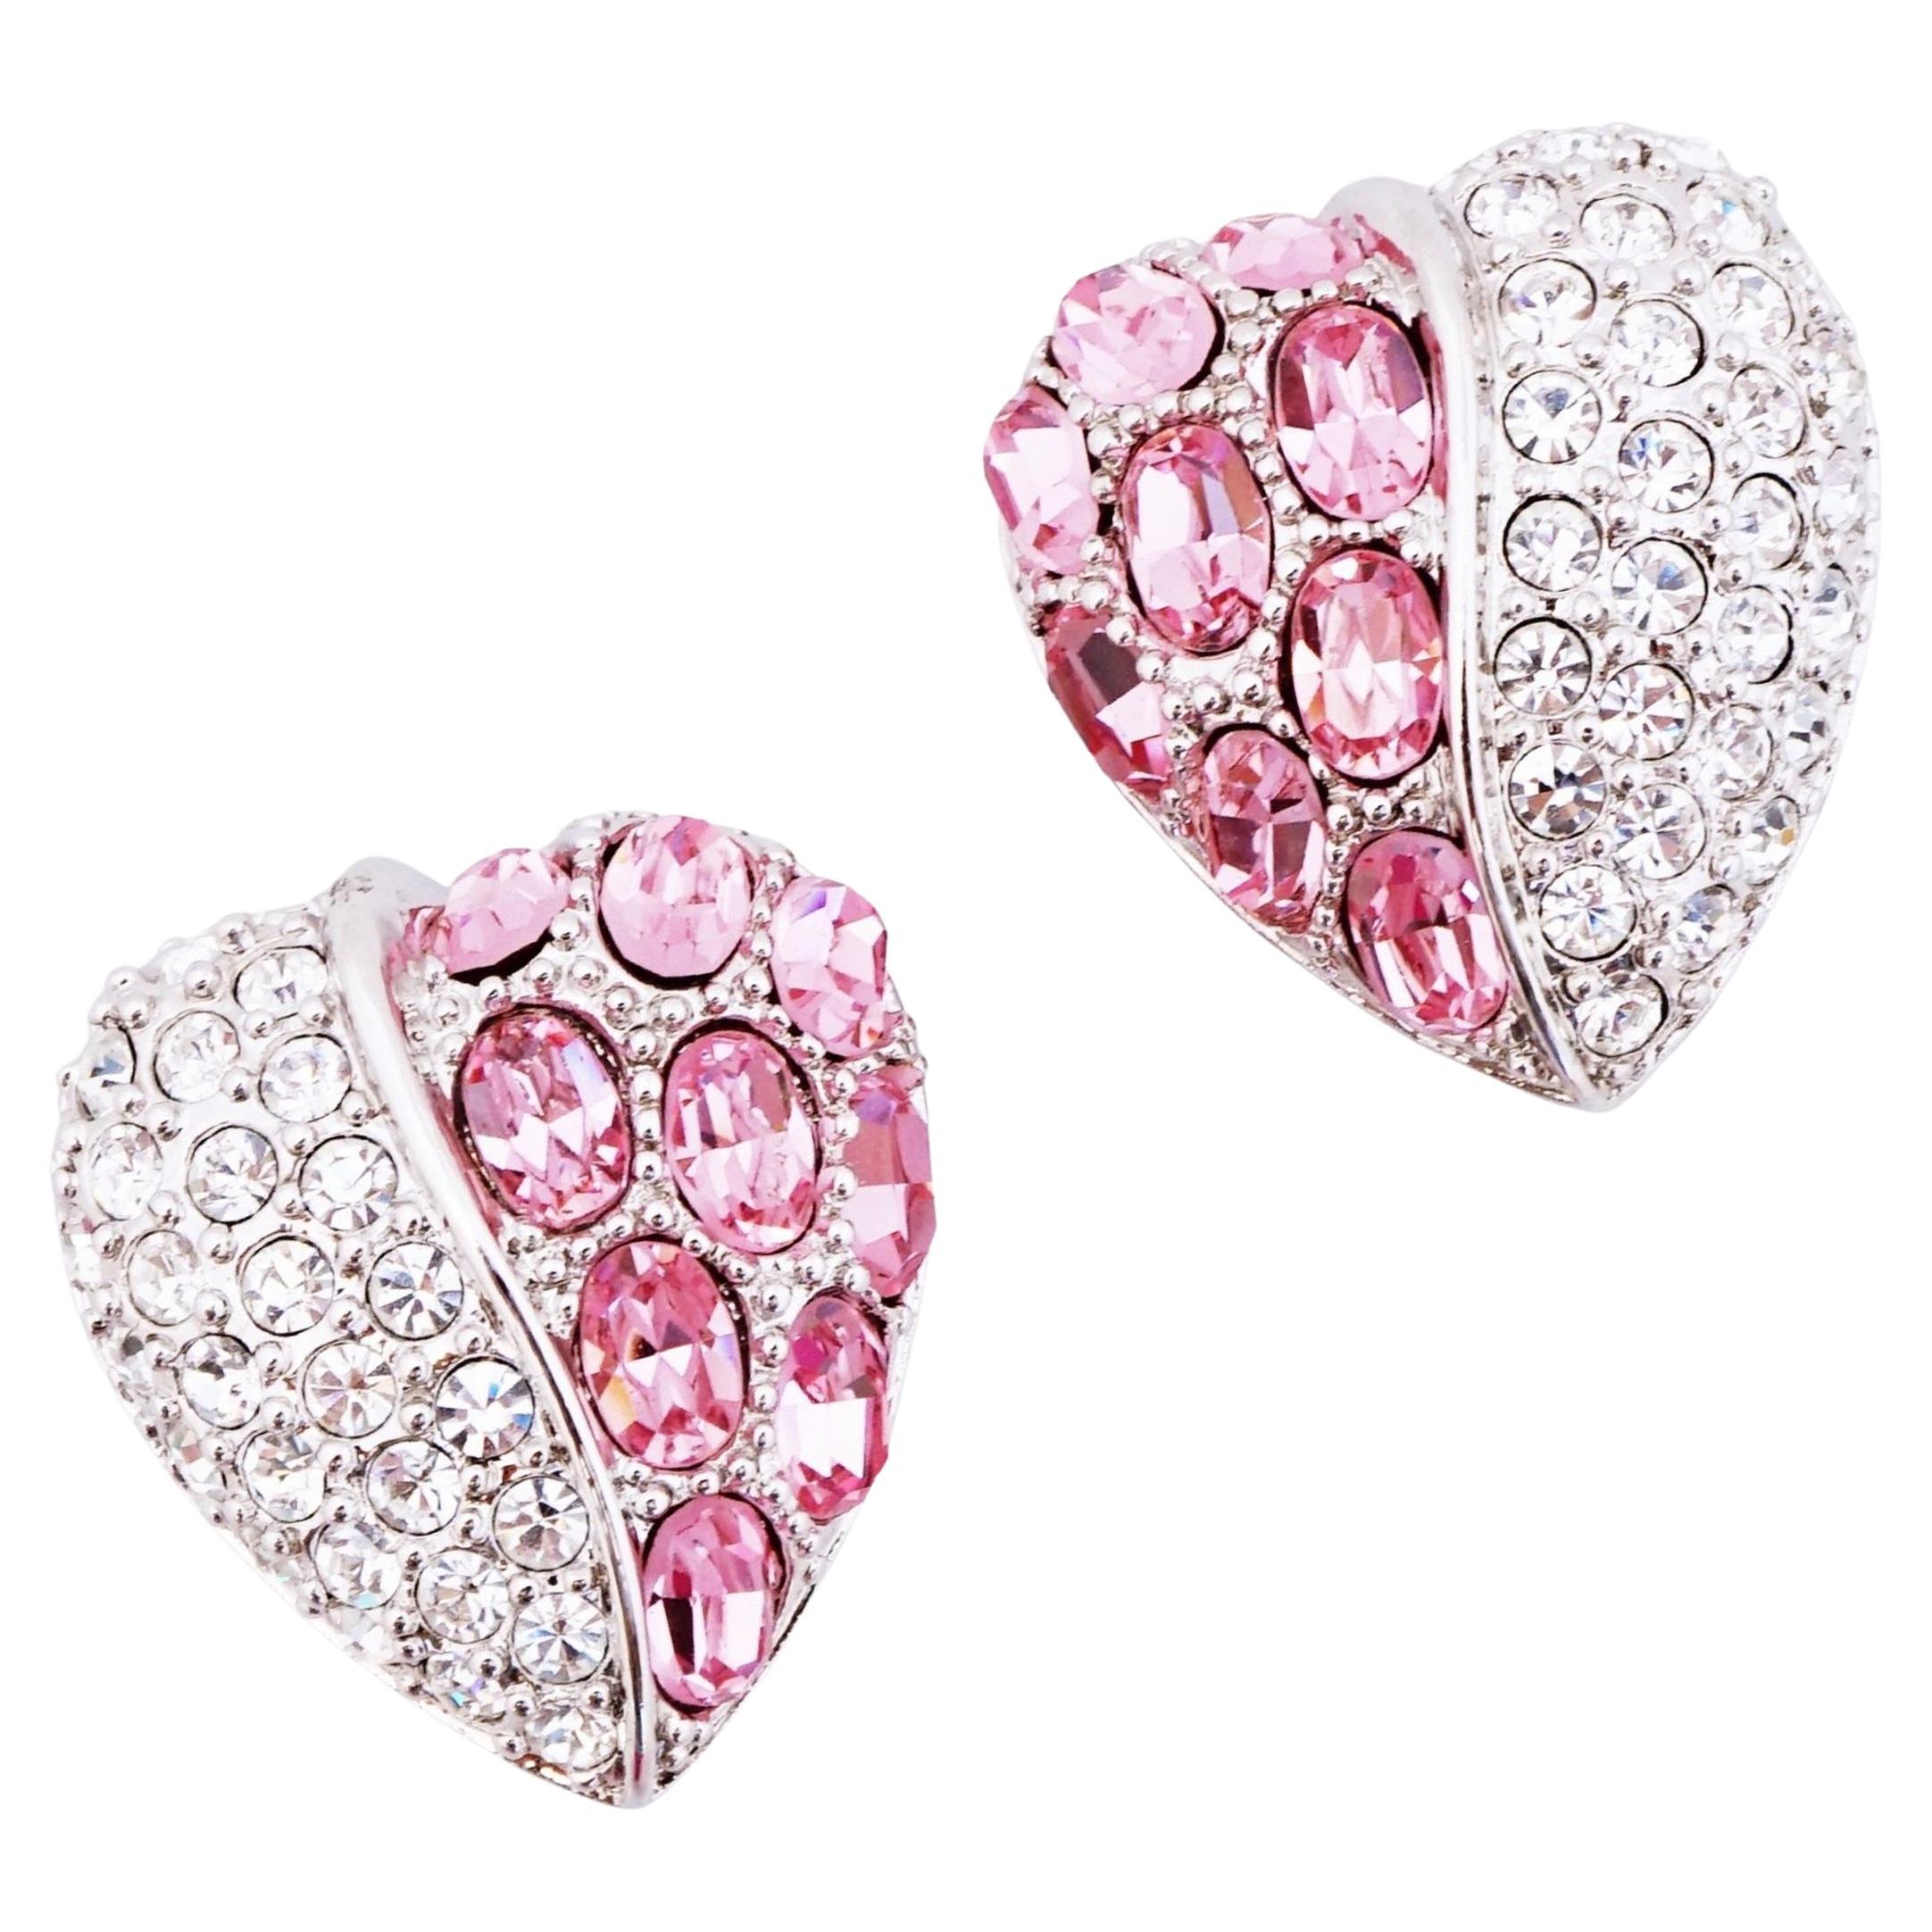 Silver Heart Statement Earrings With Pink Crystal Pavé By Nolan Miller, 1980s